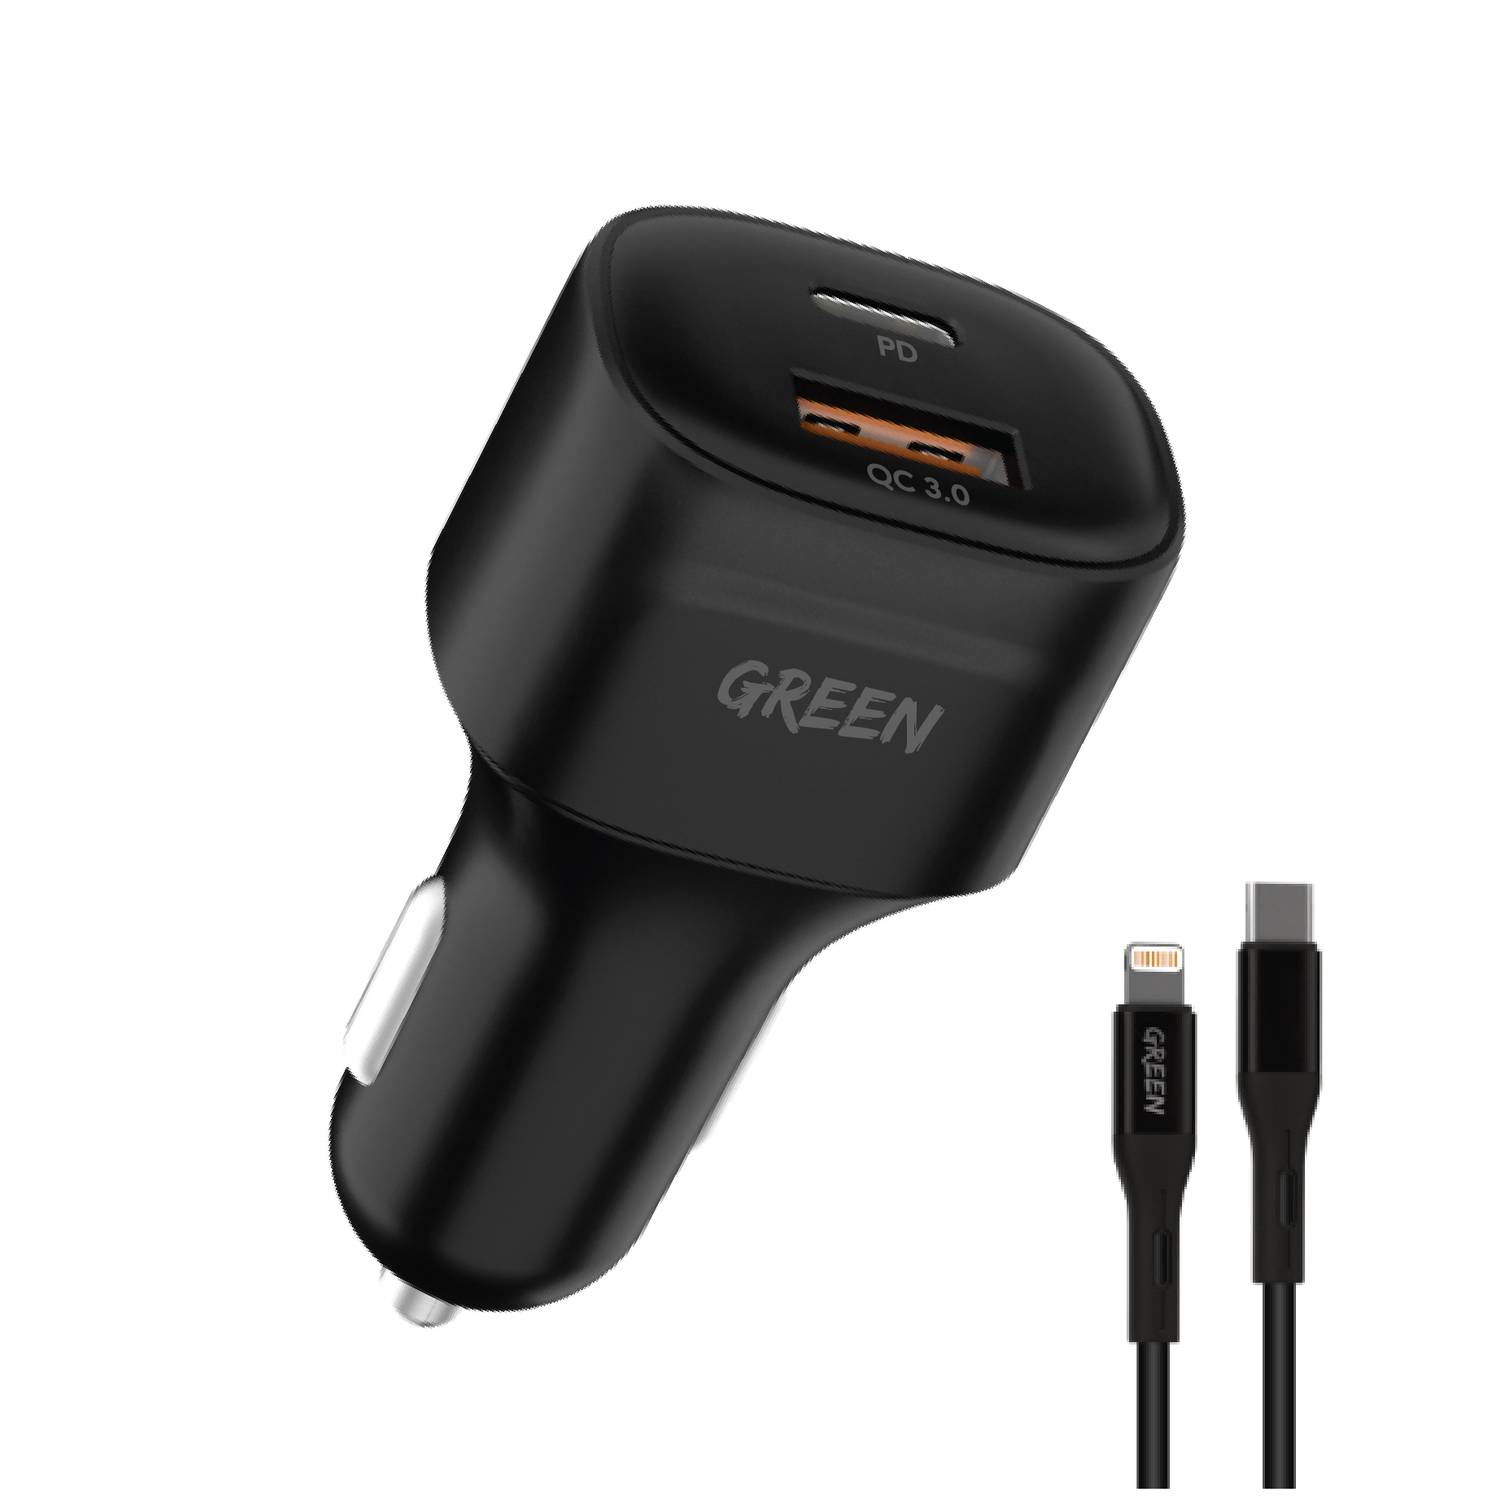 Car Charger GPS Charger Cable Fast Charging PD QC3.0 USB Car Charger 12V  Mini USB Power Cord Cable Dual Port